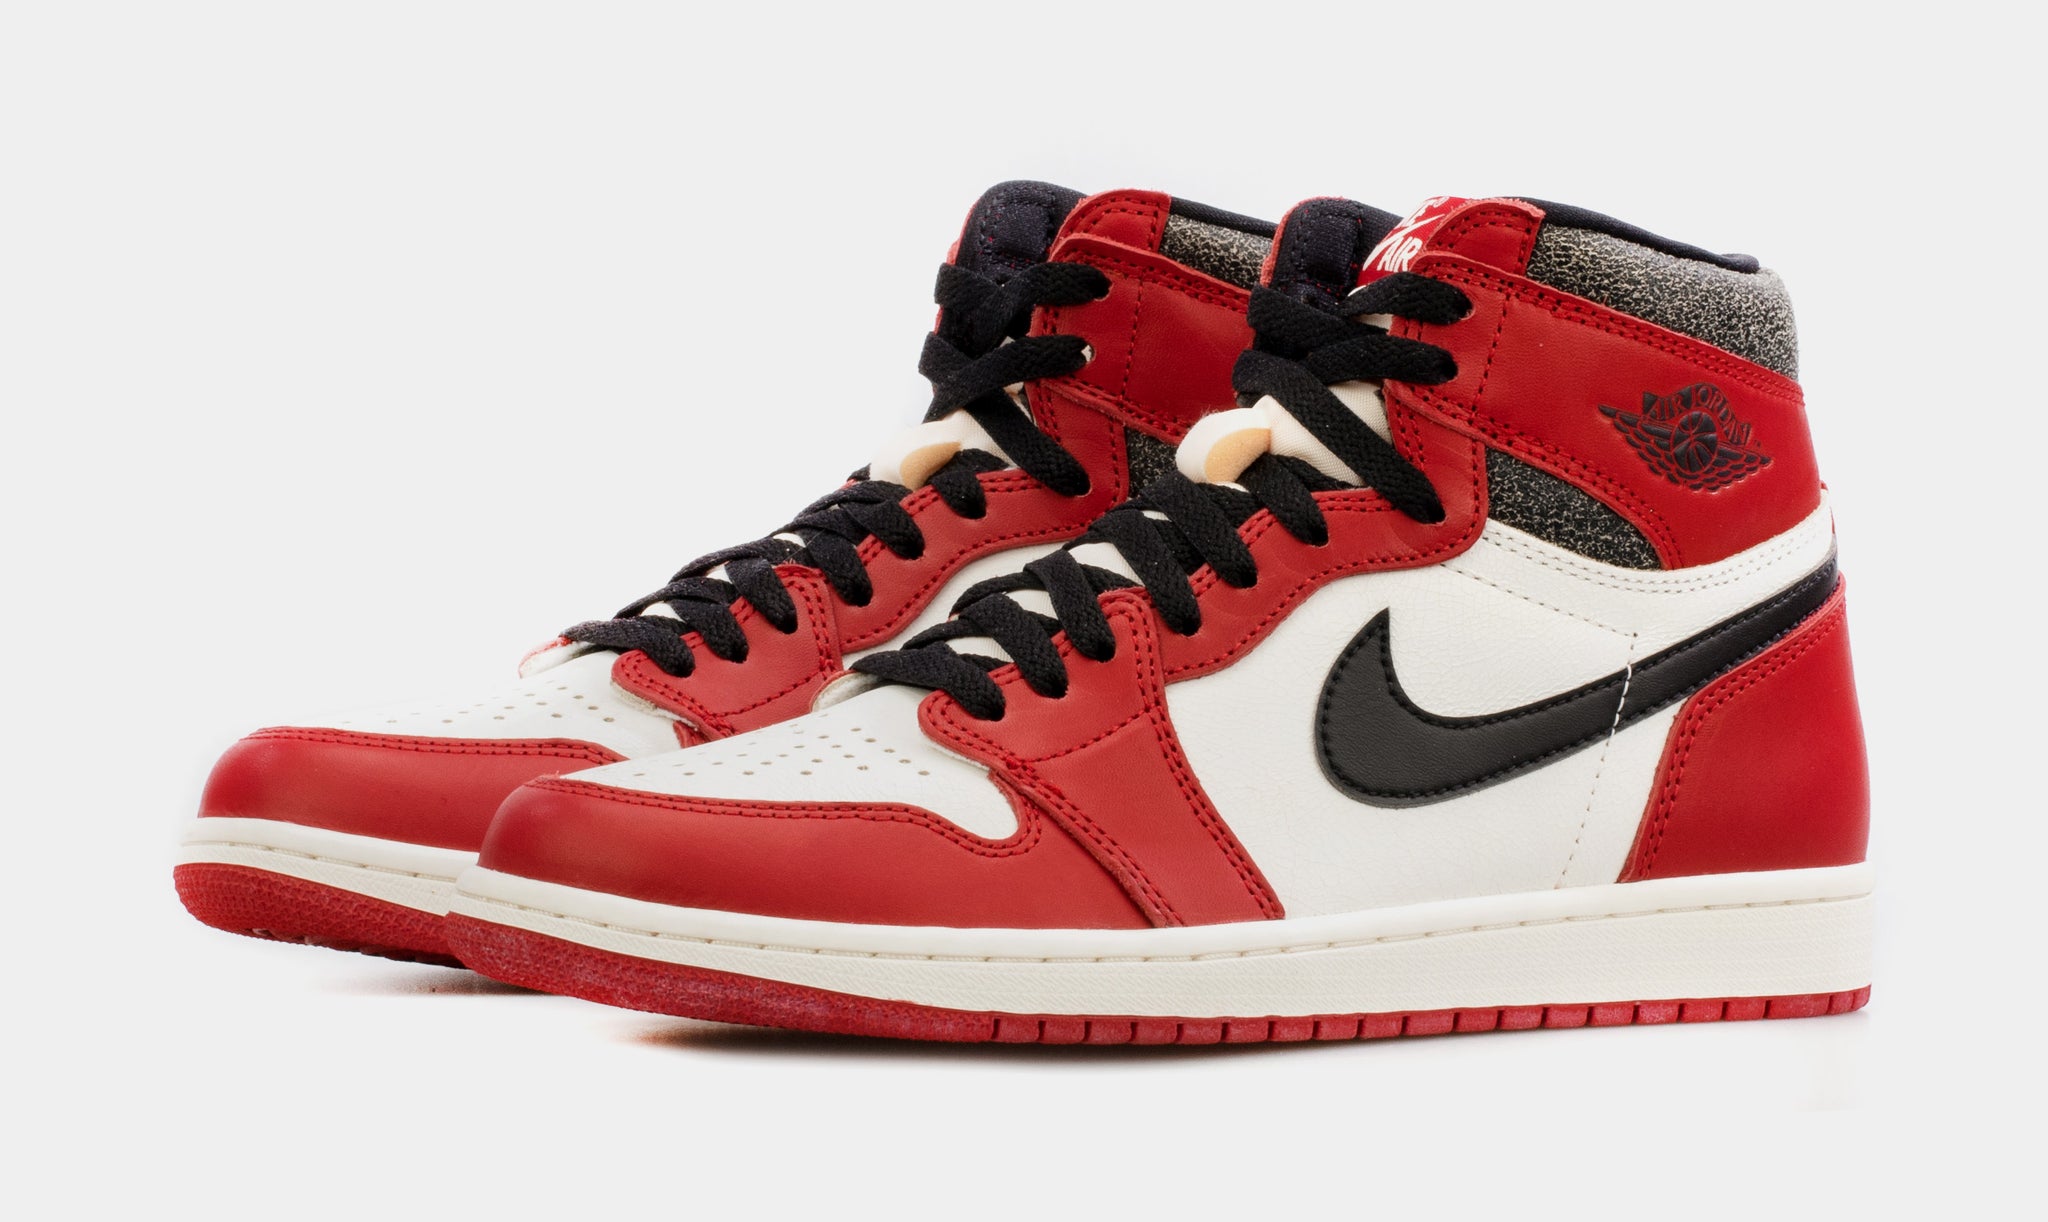 How to Buy the Air Jordan 1 High Lost and Found 'Chicago' Sneaker